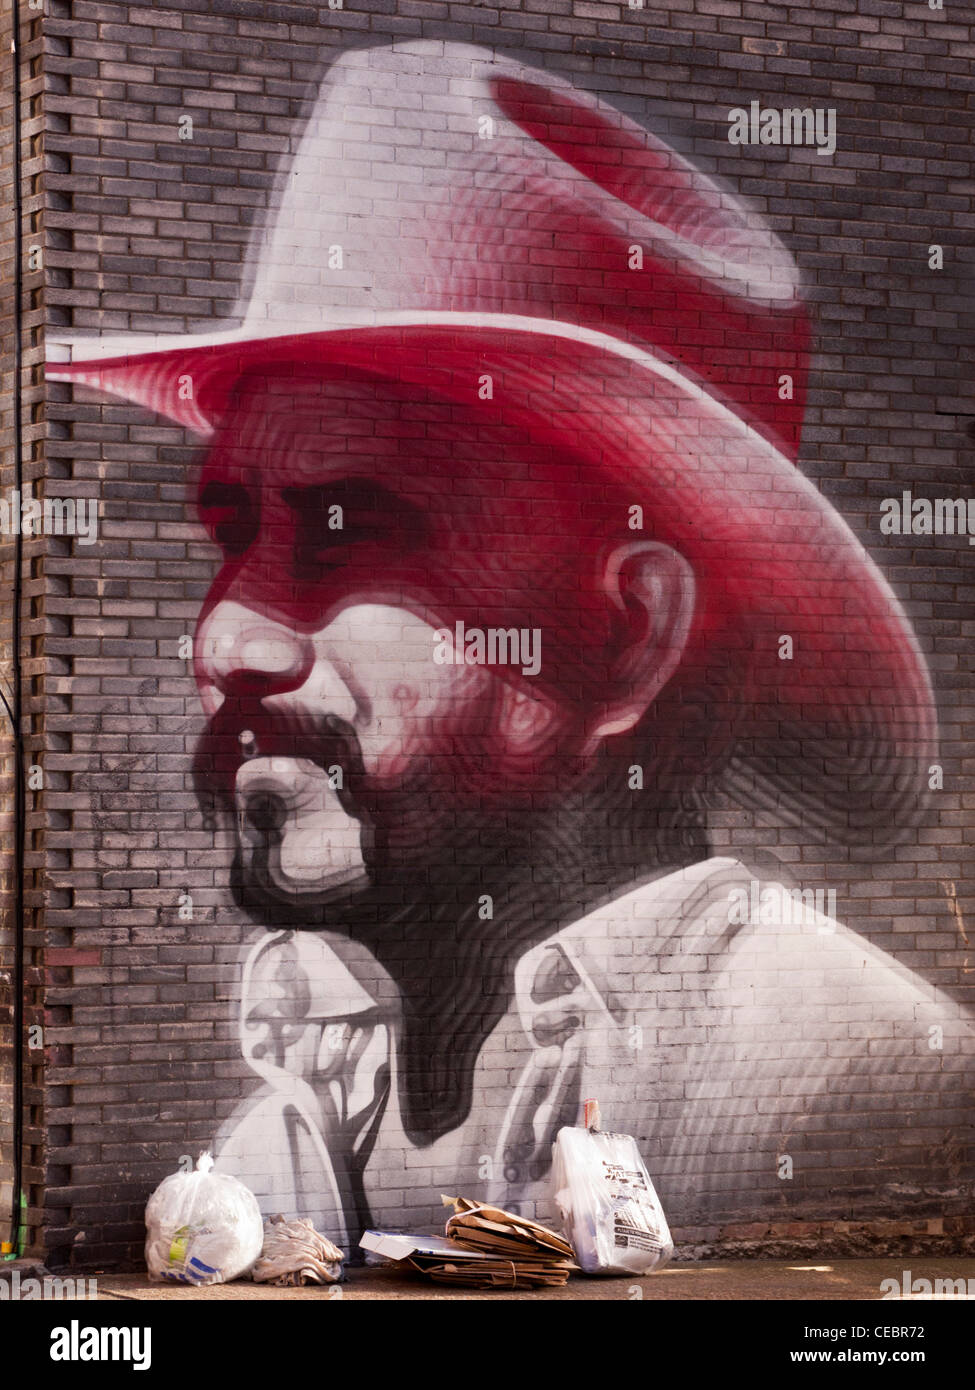 Street art of a main wearing a cowboy hat in east London, England Stock Photo